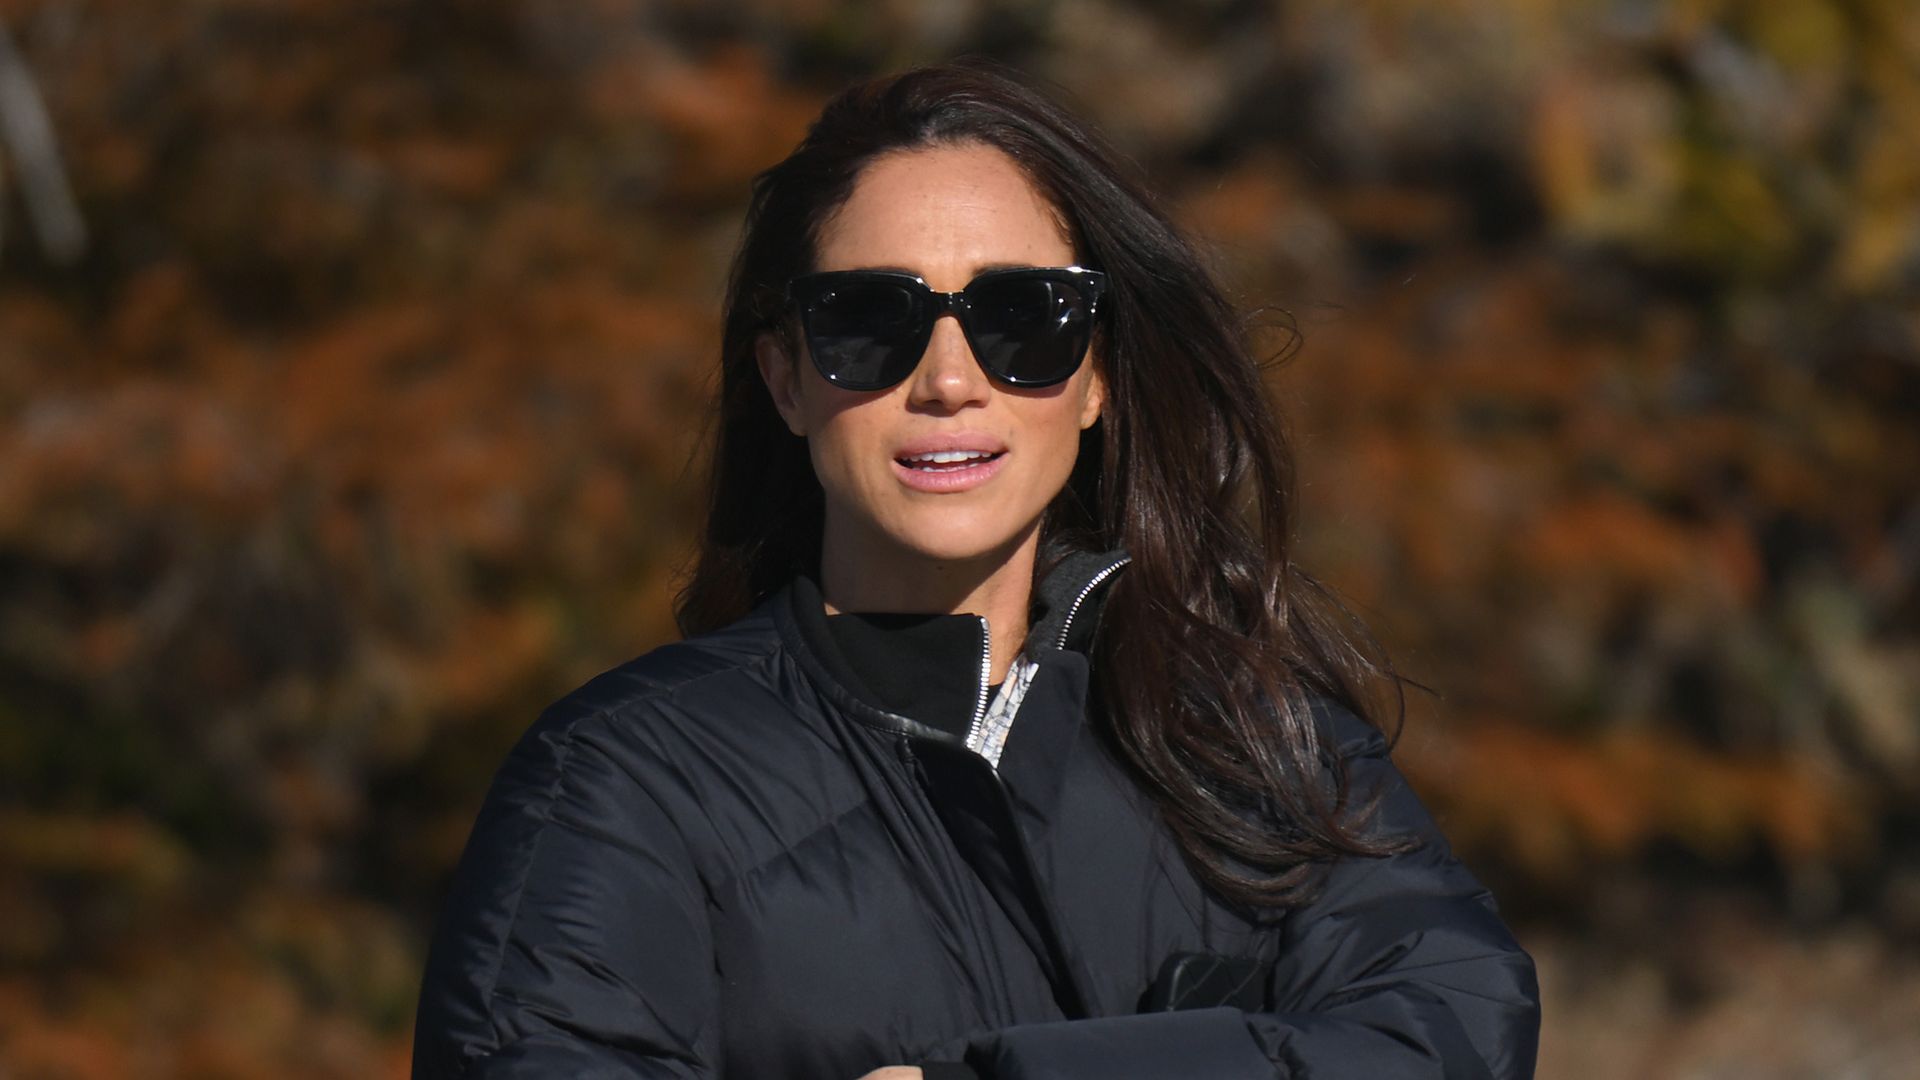 WHISTLER, BRITISH COLUMBIA - FEBRUARY 15: Meghan, Duchess of Sussex attends the Invictus Games One Year To Go Event on February 15, 2024 in Whistler, Canada. (Photo by Karwai Tang/WireImage)